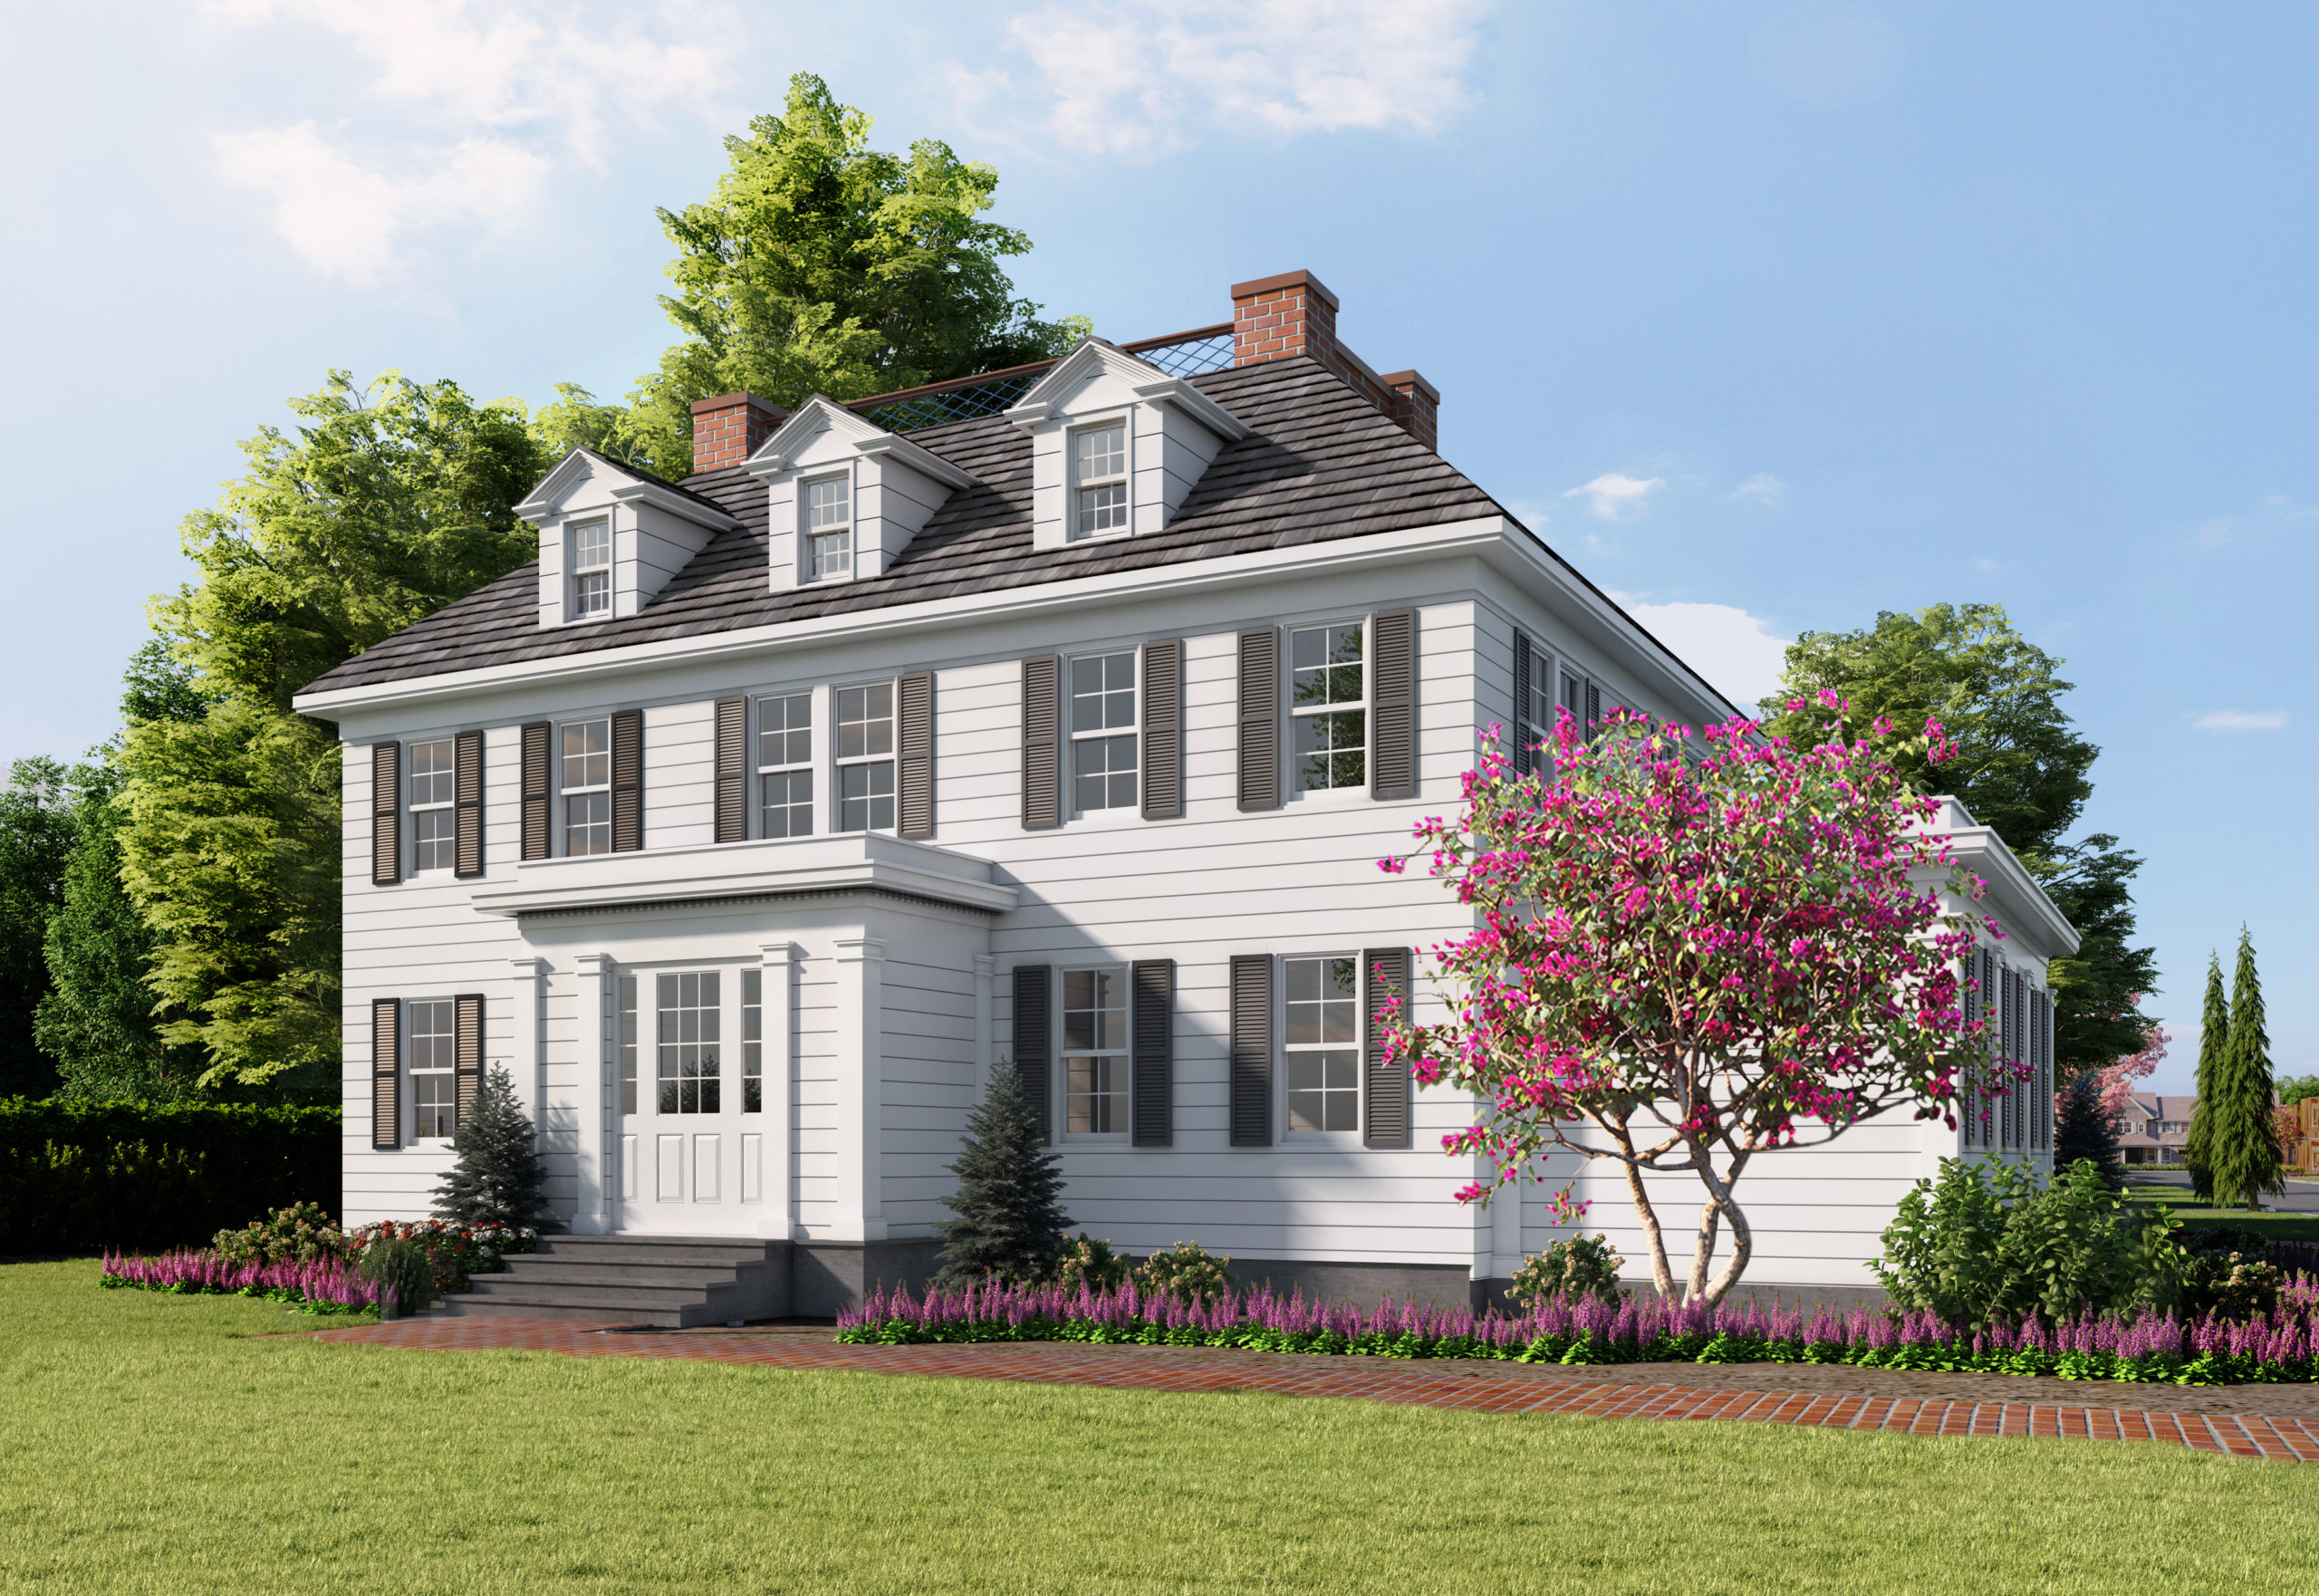 A rendering of the restored Terry Cottage. COURTESY THE BEECHWOOD ORGANIZATION